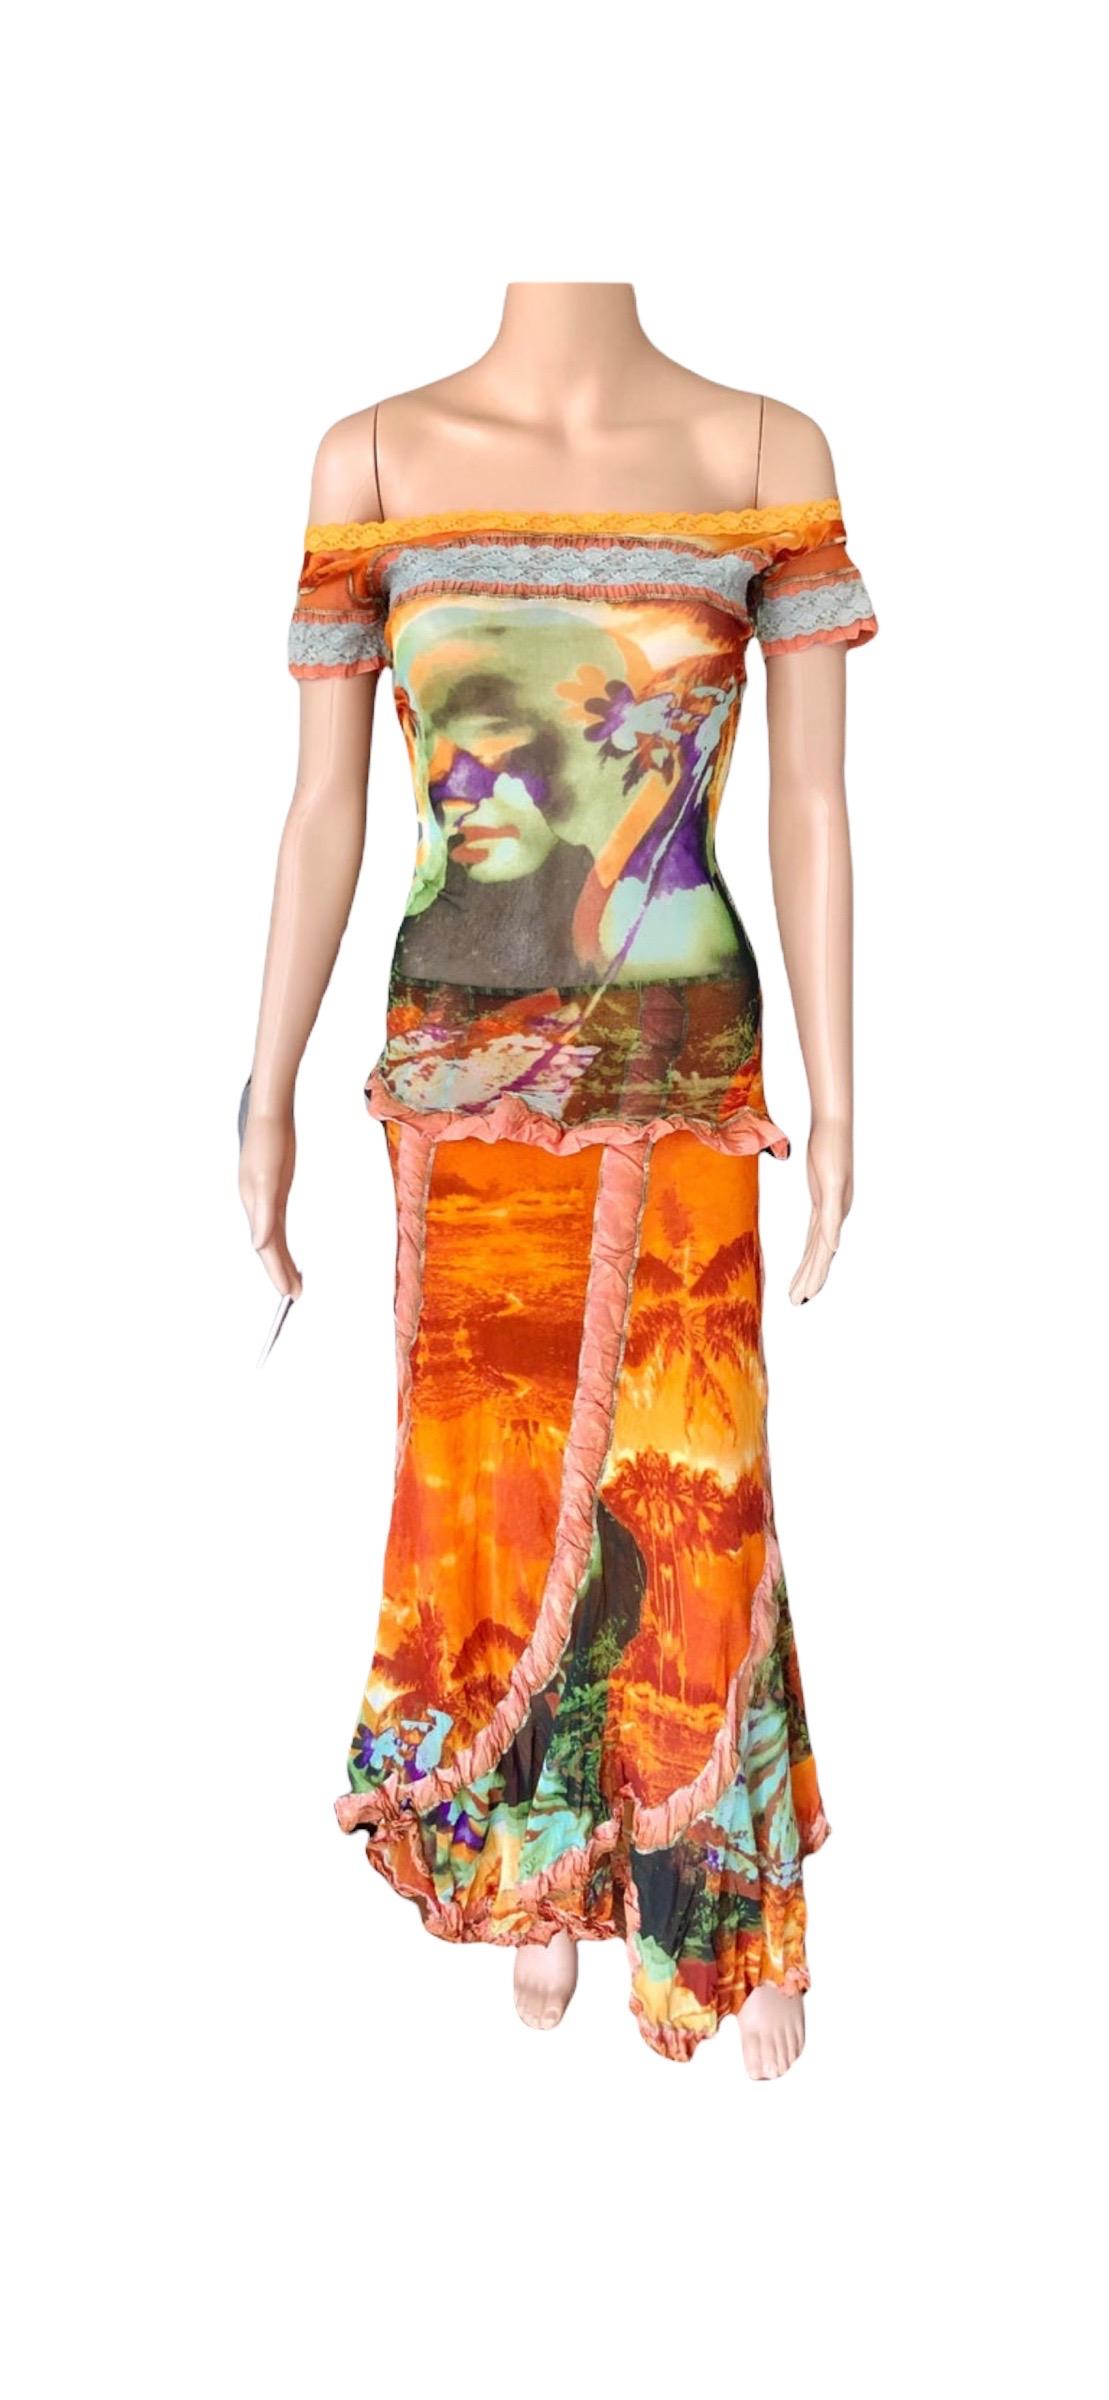 Jean Paul Gaultier S/S 2000 Abstract Psychedelic Top &Skirt Ensemble 2 Piece Set For Sale 6